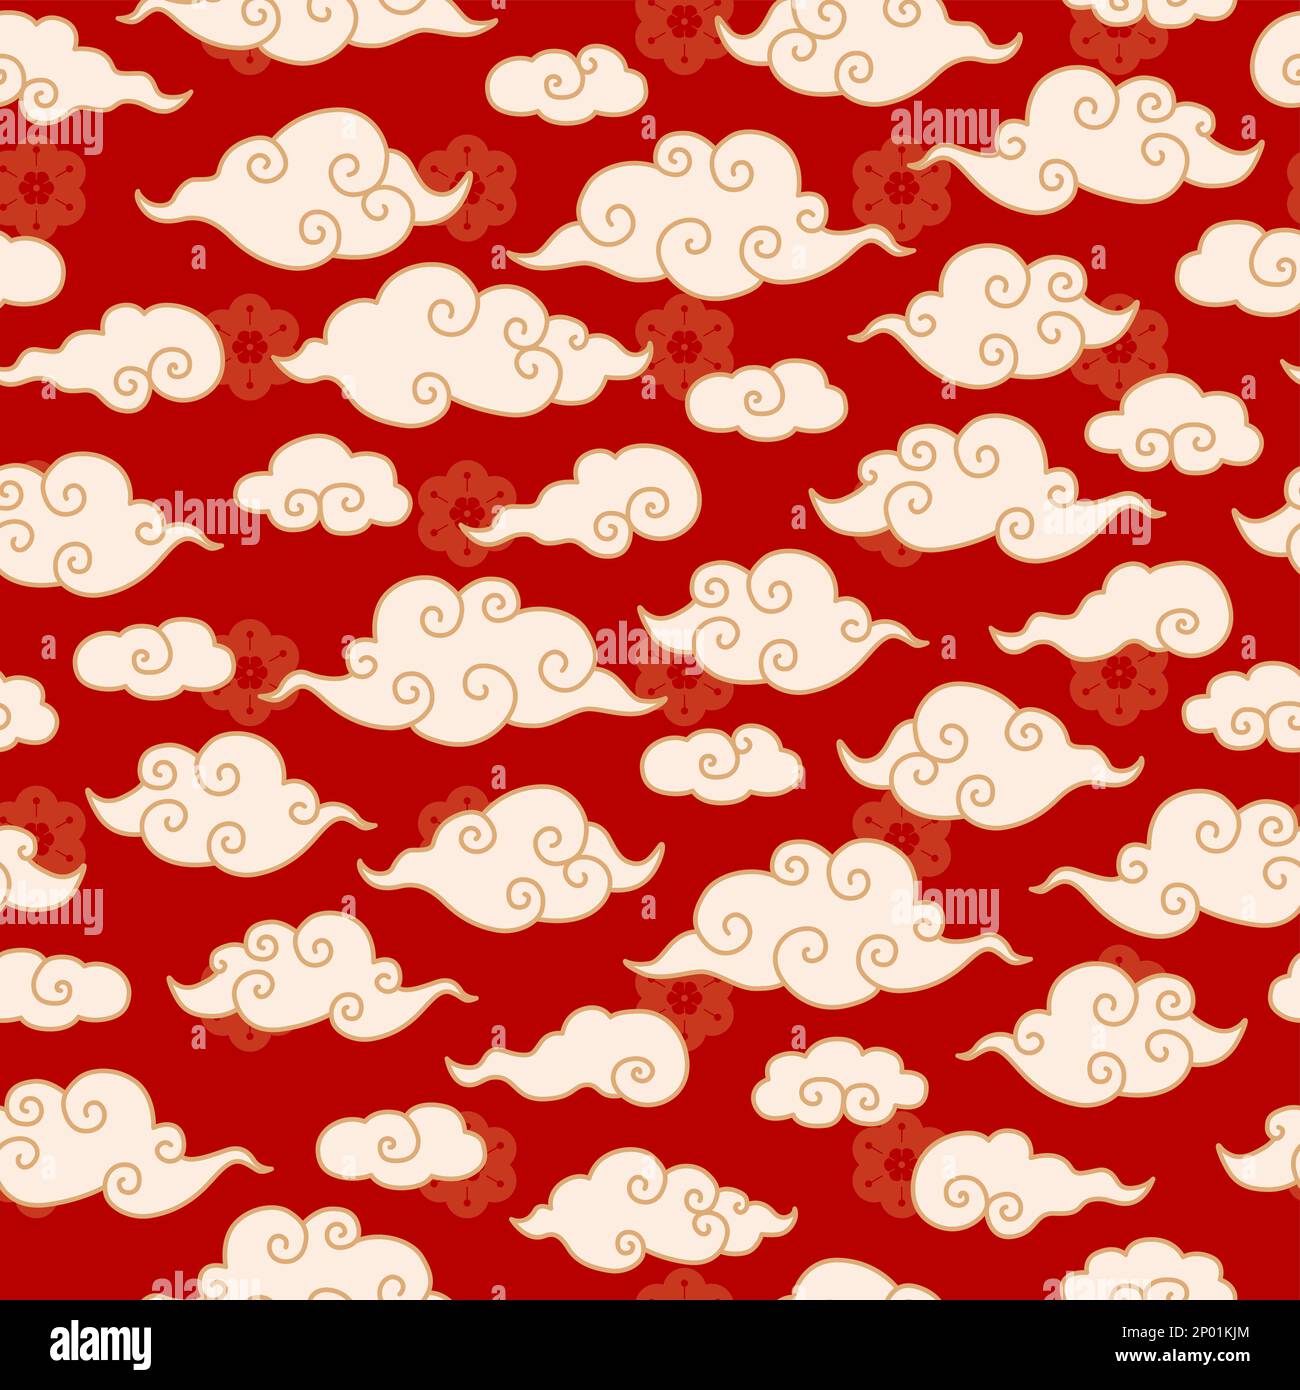 Vector Chinese, Korean or Japanese Traditional Line Drawing Cloud Seamless Pattern. Stock Vector